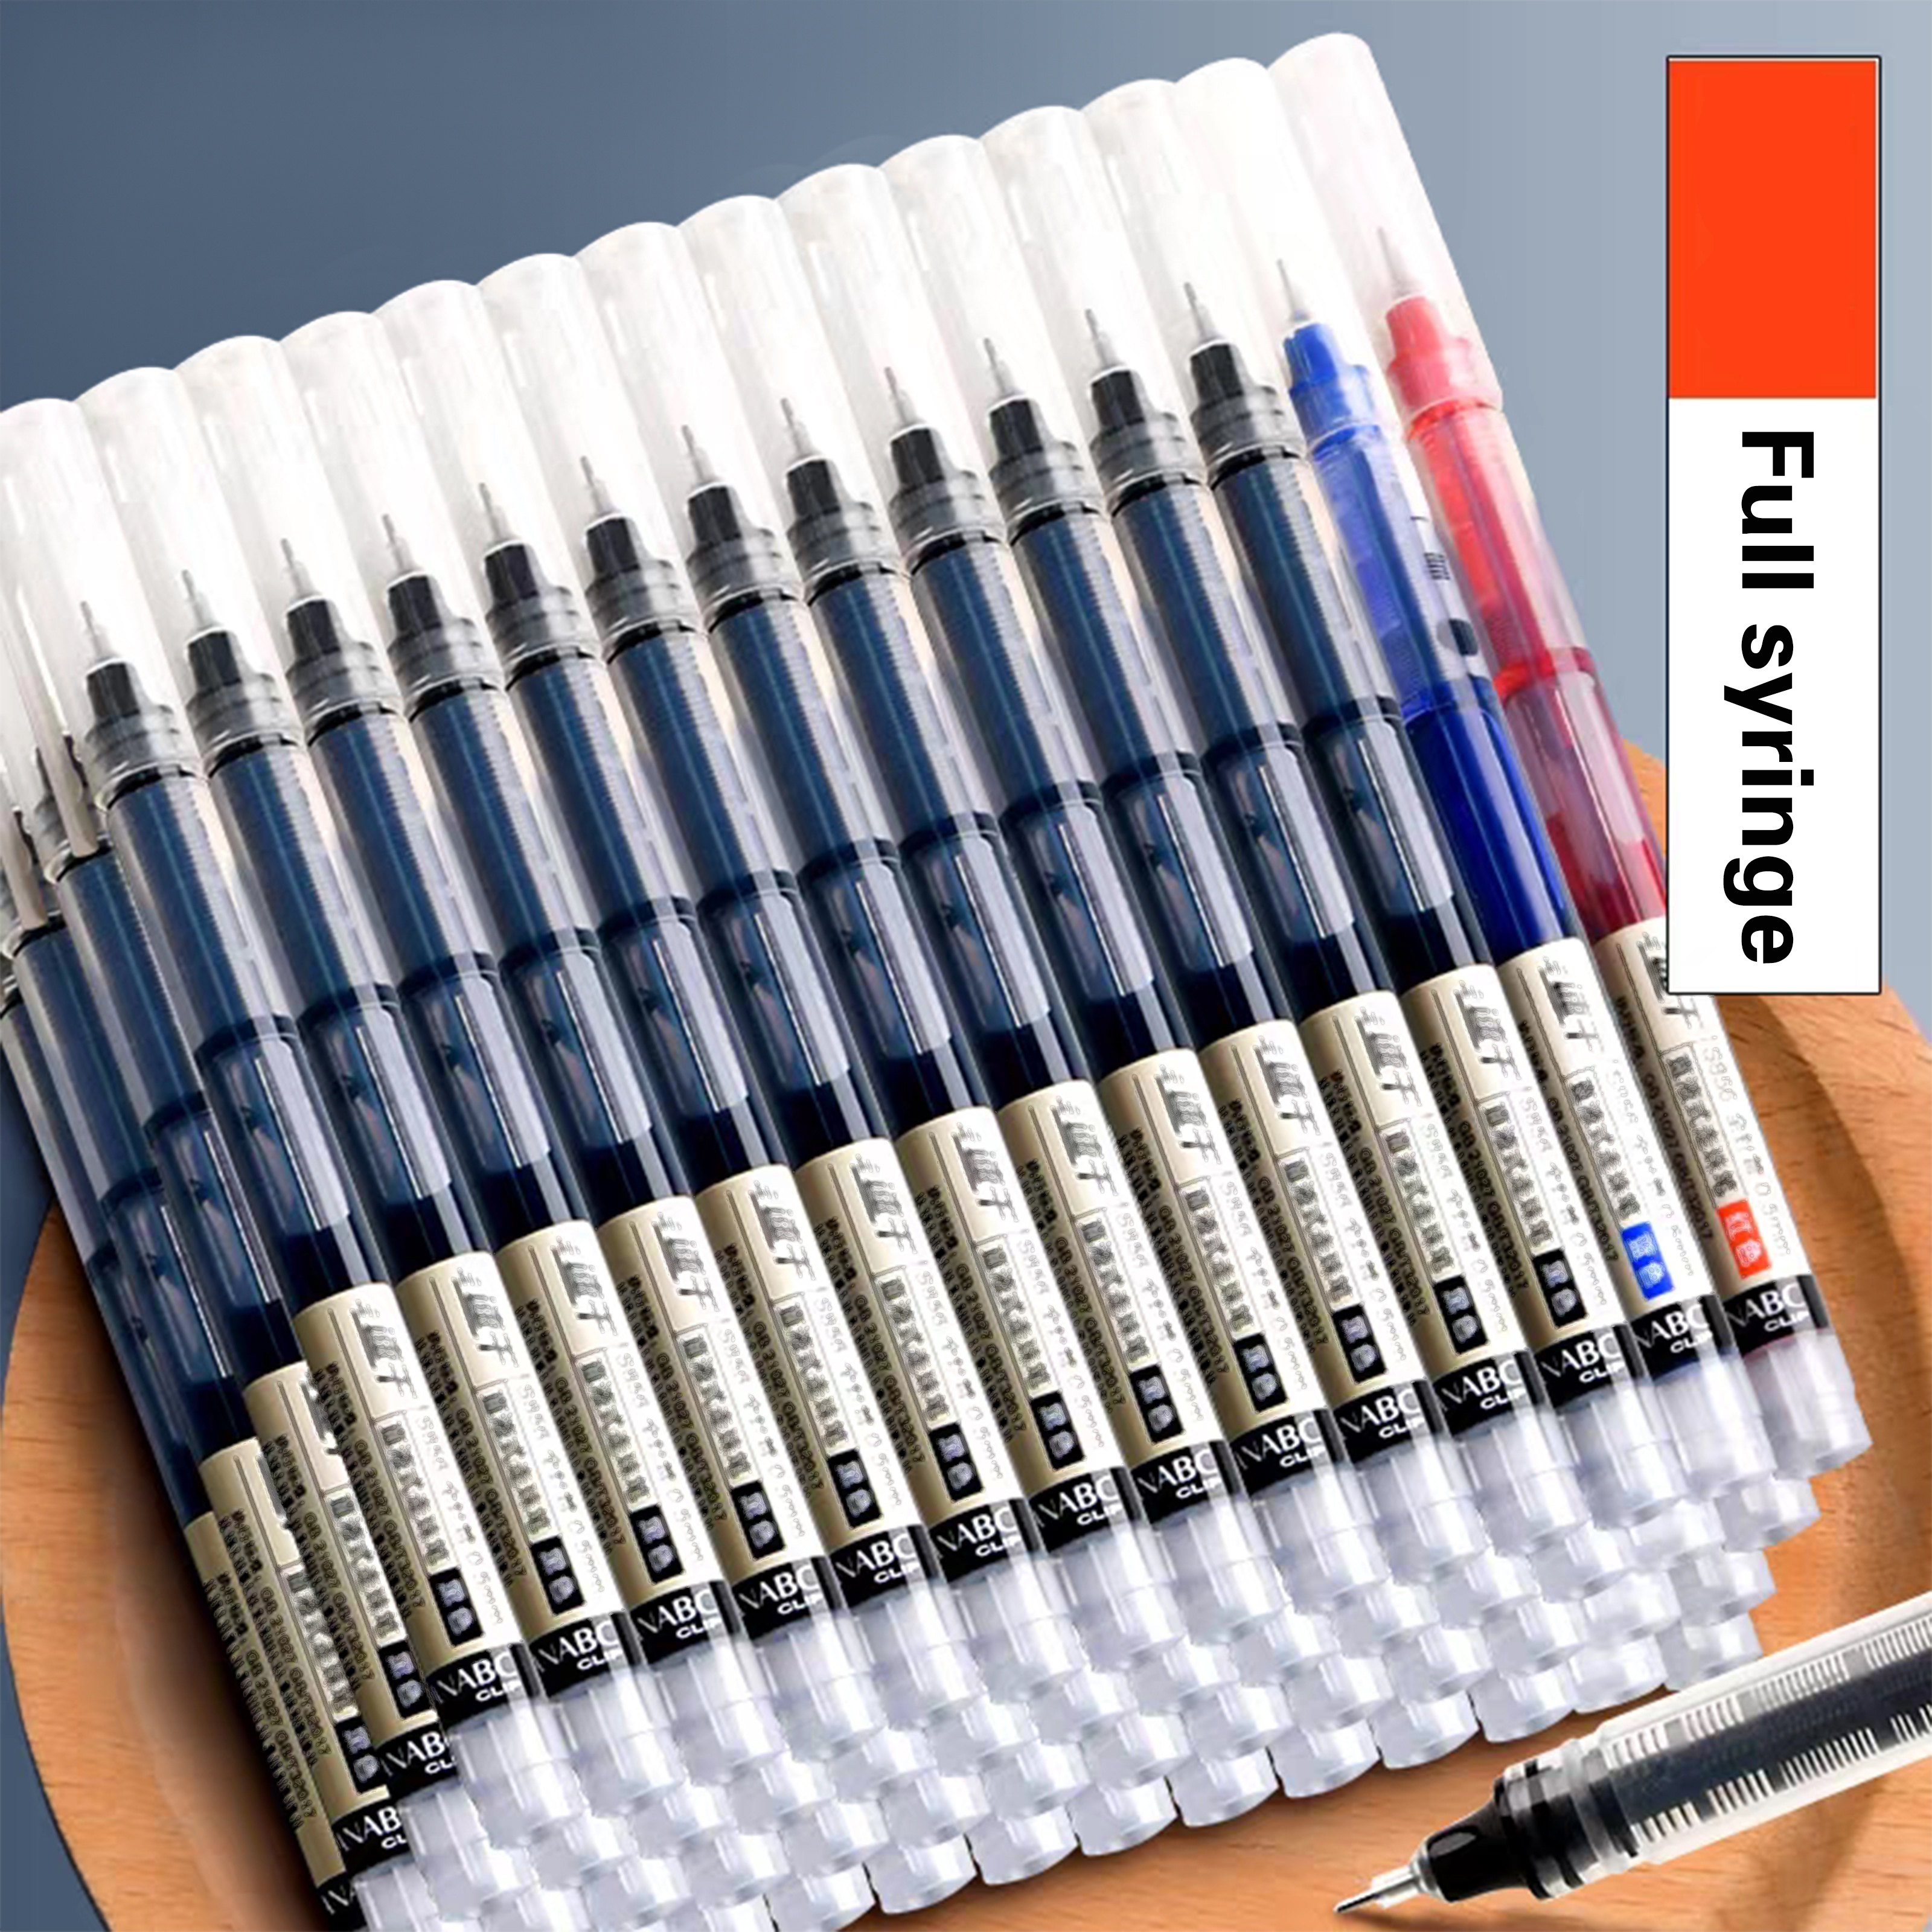 

10-piece Smooth Writing Gel Pens, 0.5mm Fine Point, Assorted Inks (black/red/blue), Ideal For Home, Office & Students